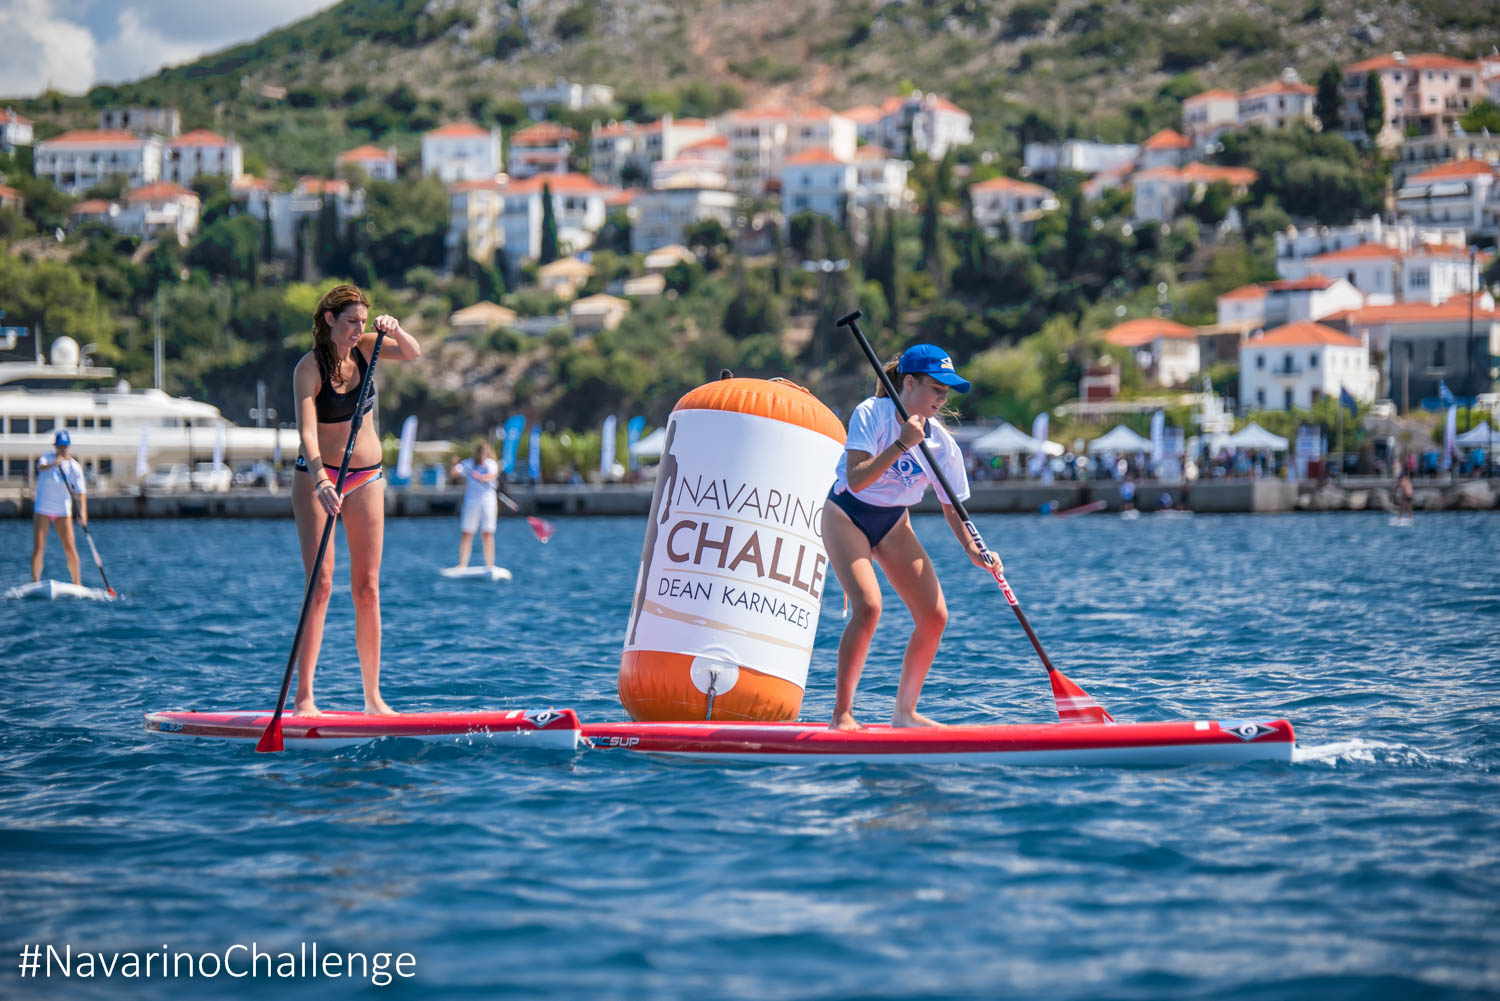 A Stand Up Paddleboarding race took place for the first time in the event! © Elias Lefas